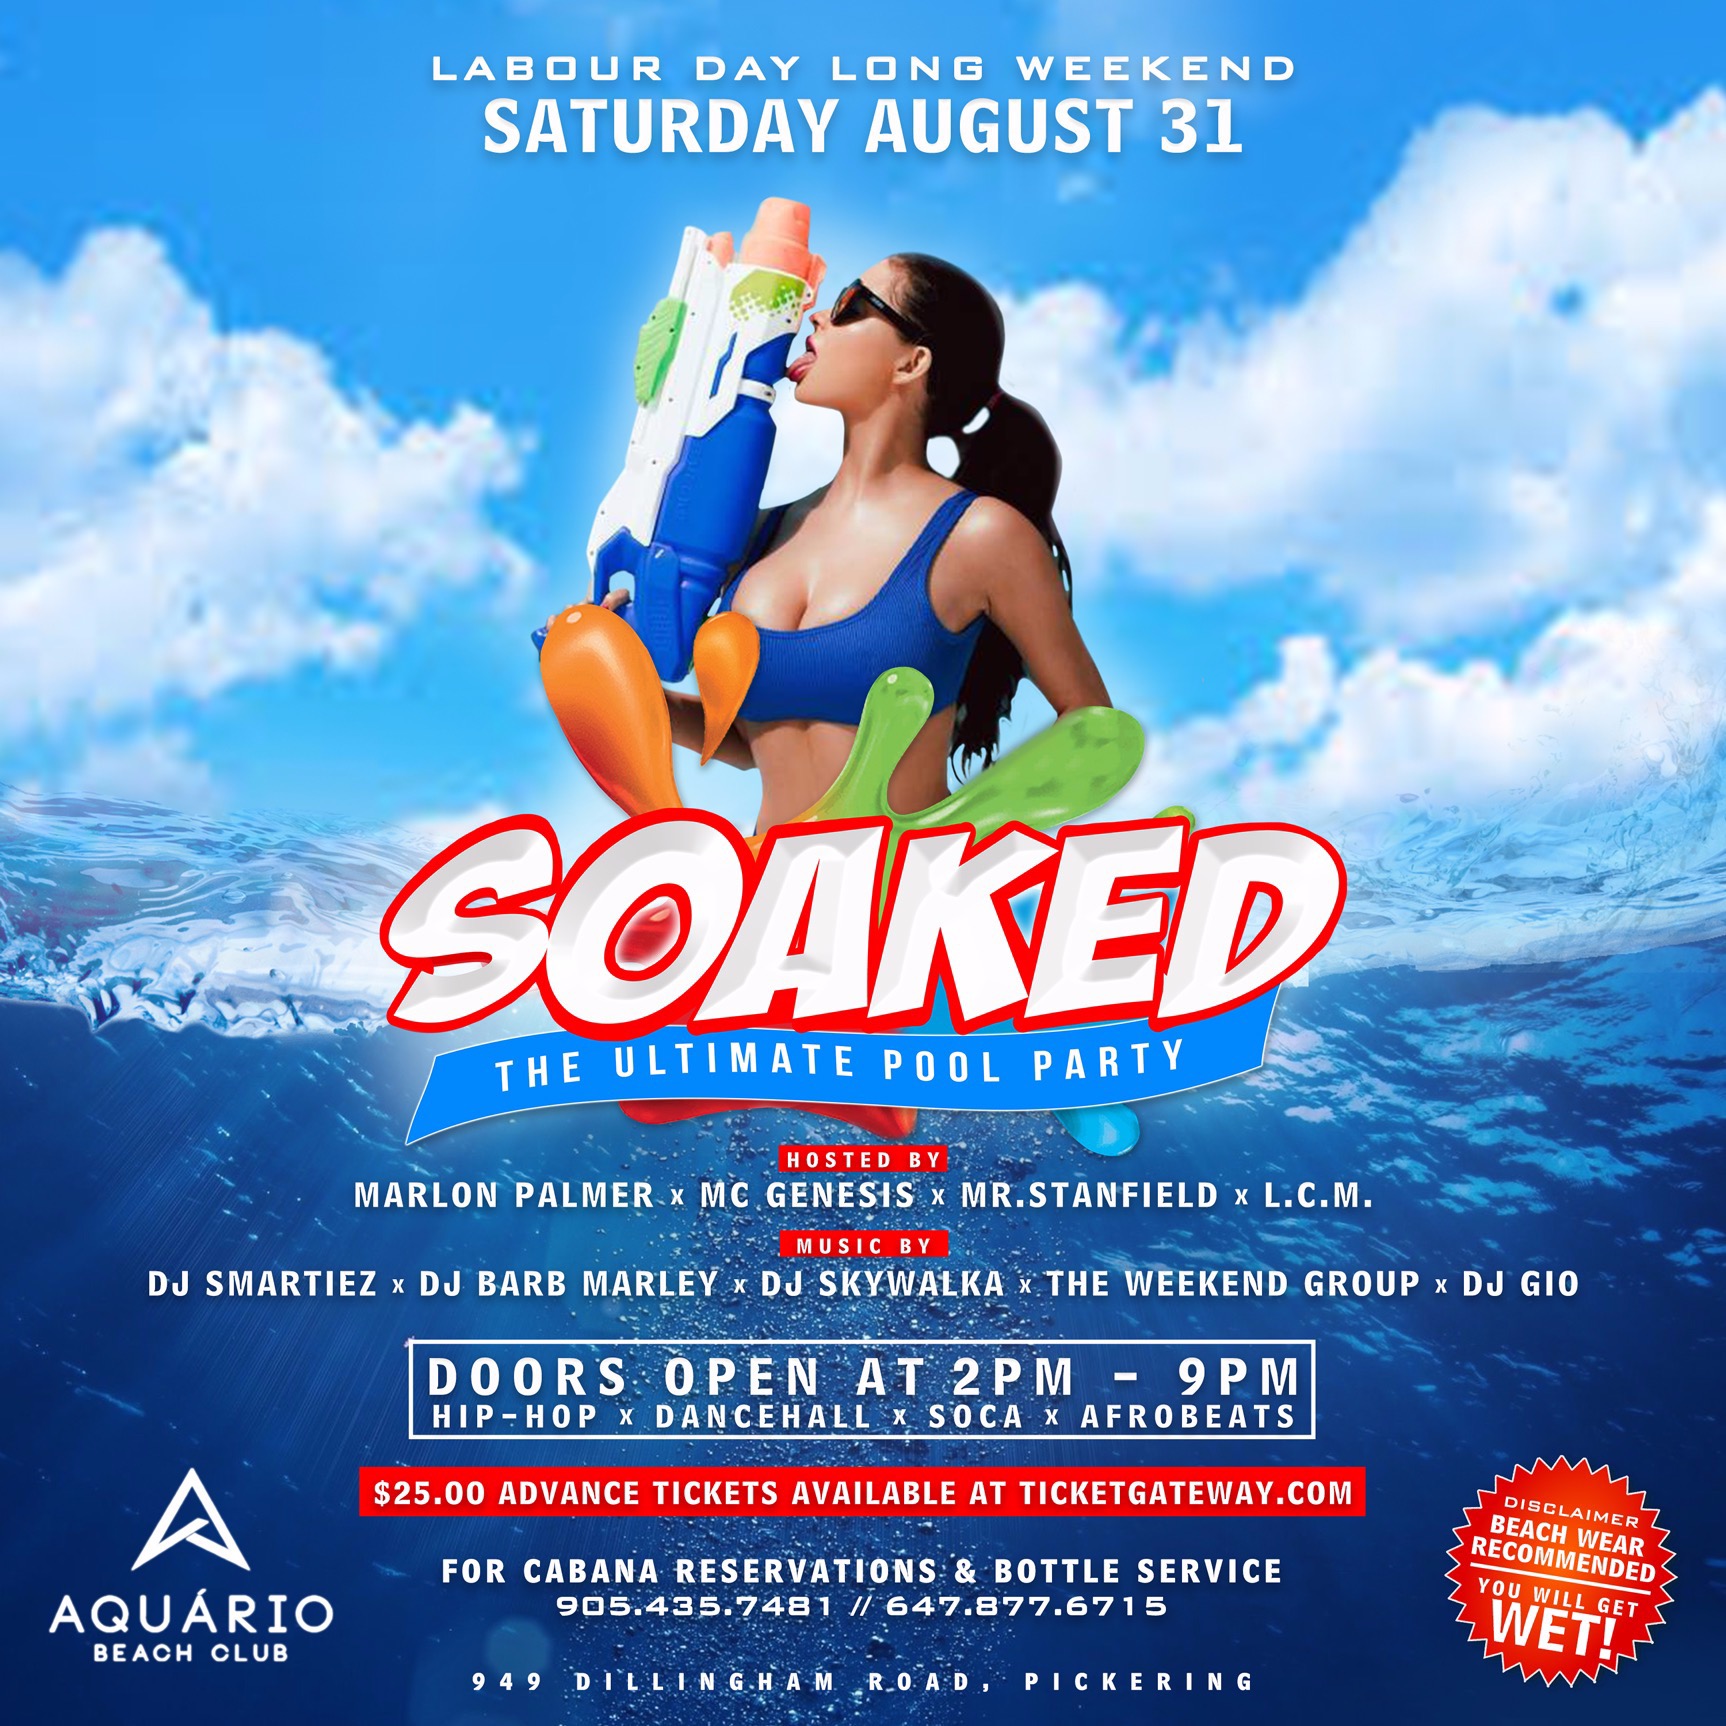 SOAKED - The Ultimate Pool Party